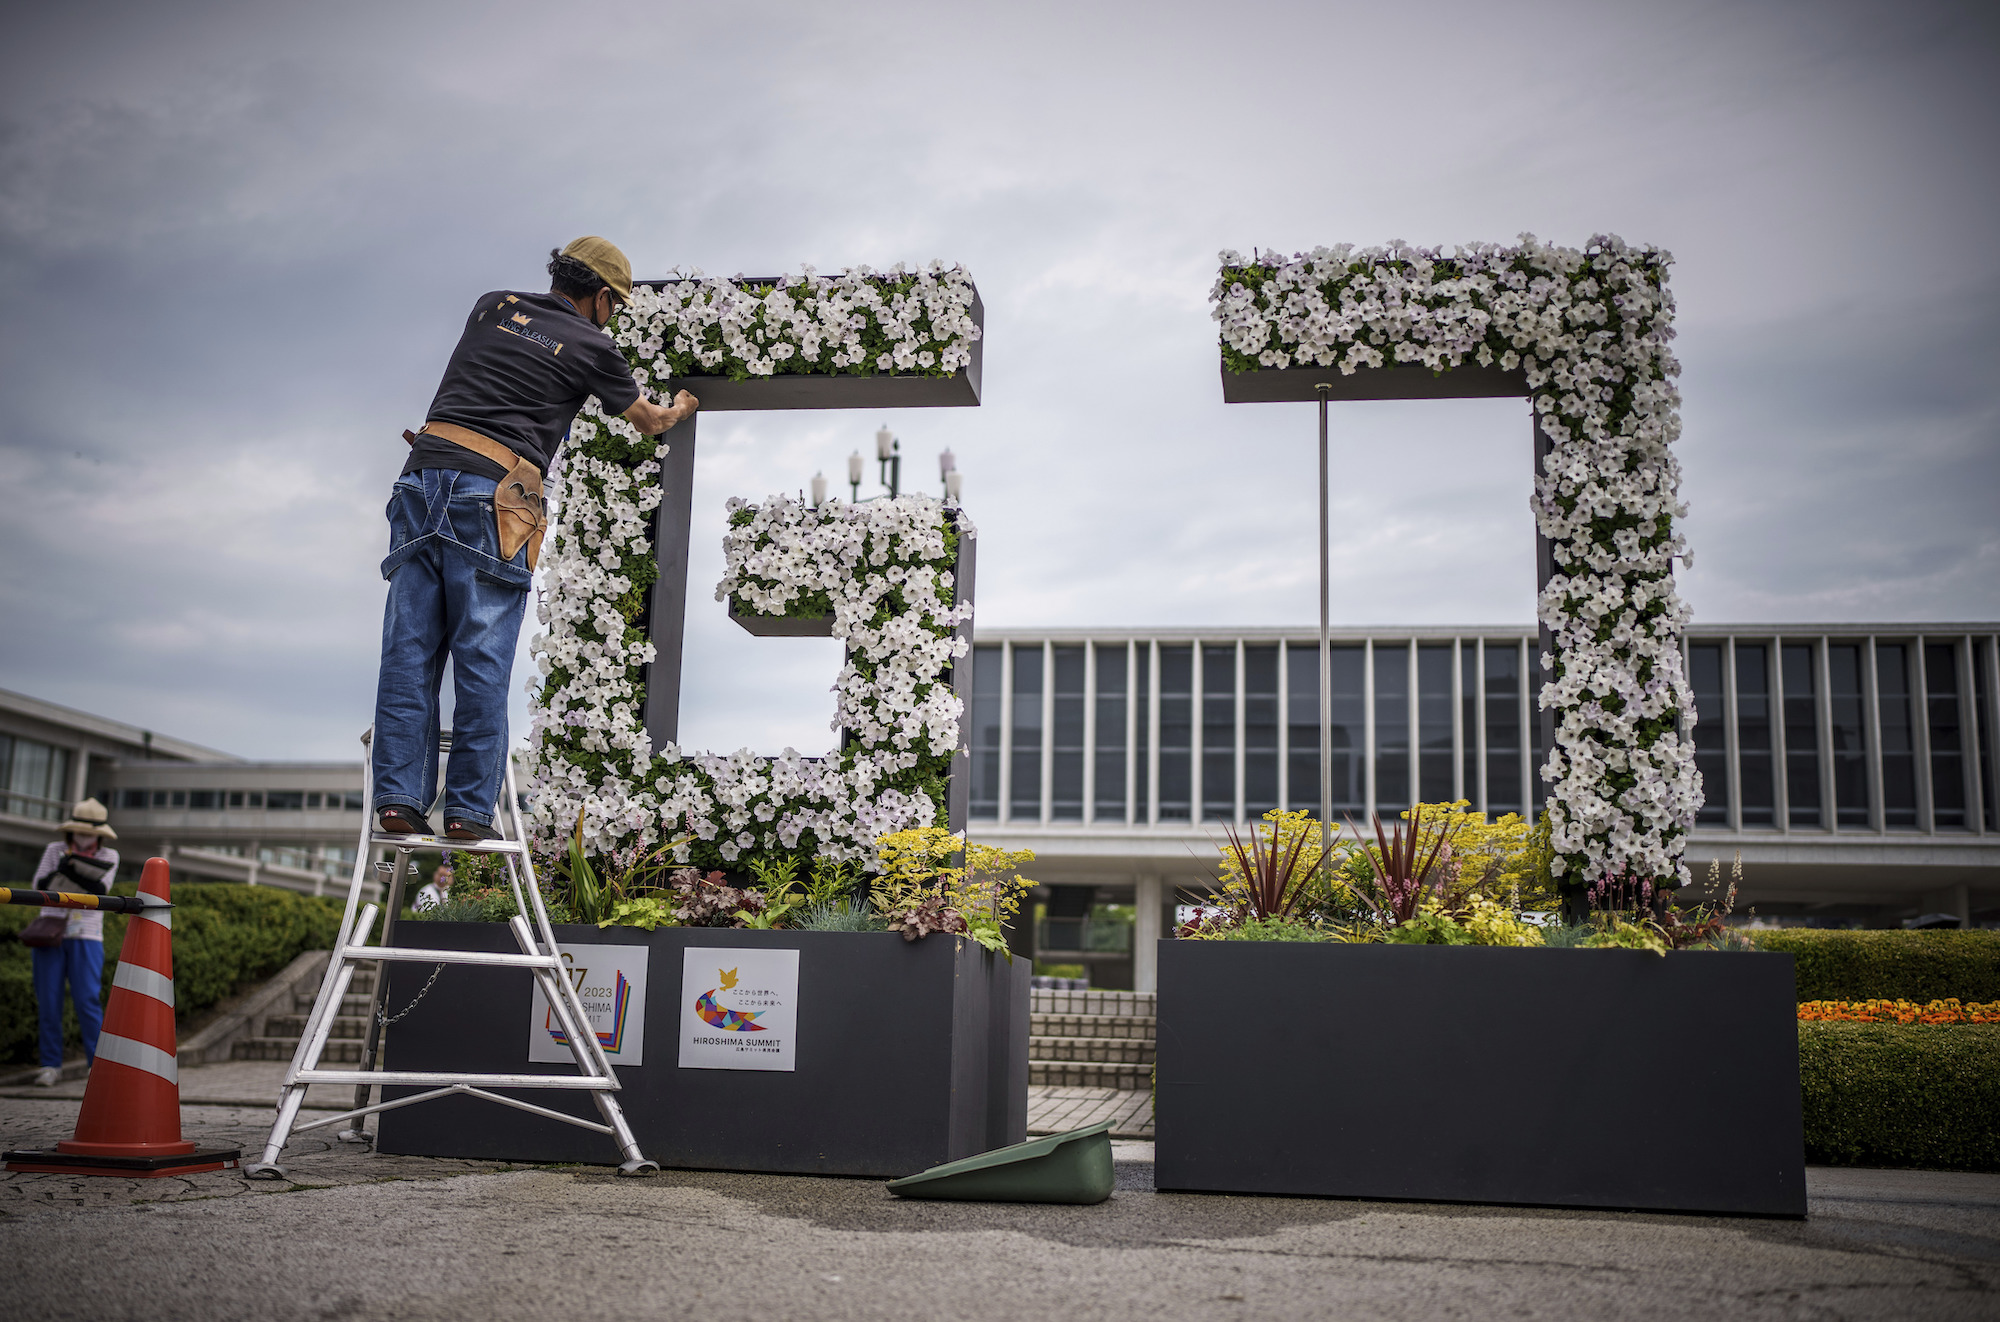 A gardener works on a G7 logo made of flowers with Genbaku Dome in the background in Hiroshima Peace Memorial Park on Thursday.